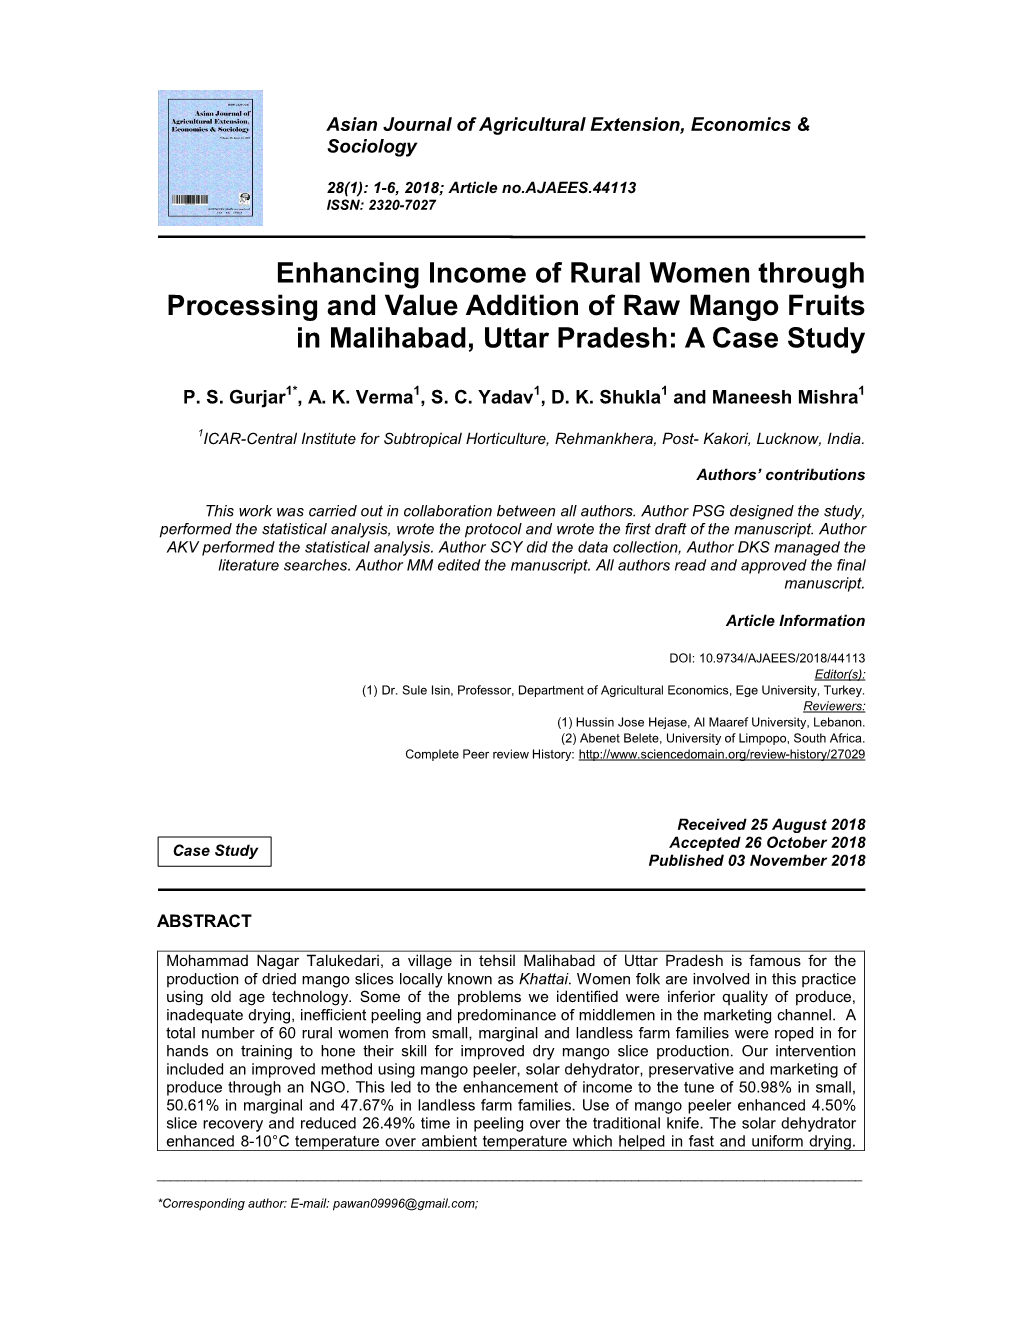 Enhancing Income of Rural Women Through Processing and Value Addition of Raw Mango Fruits in Malihabad, Uttar Pradesh: a Case Study